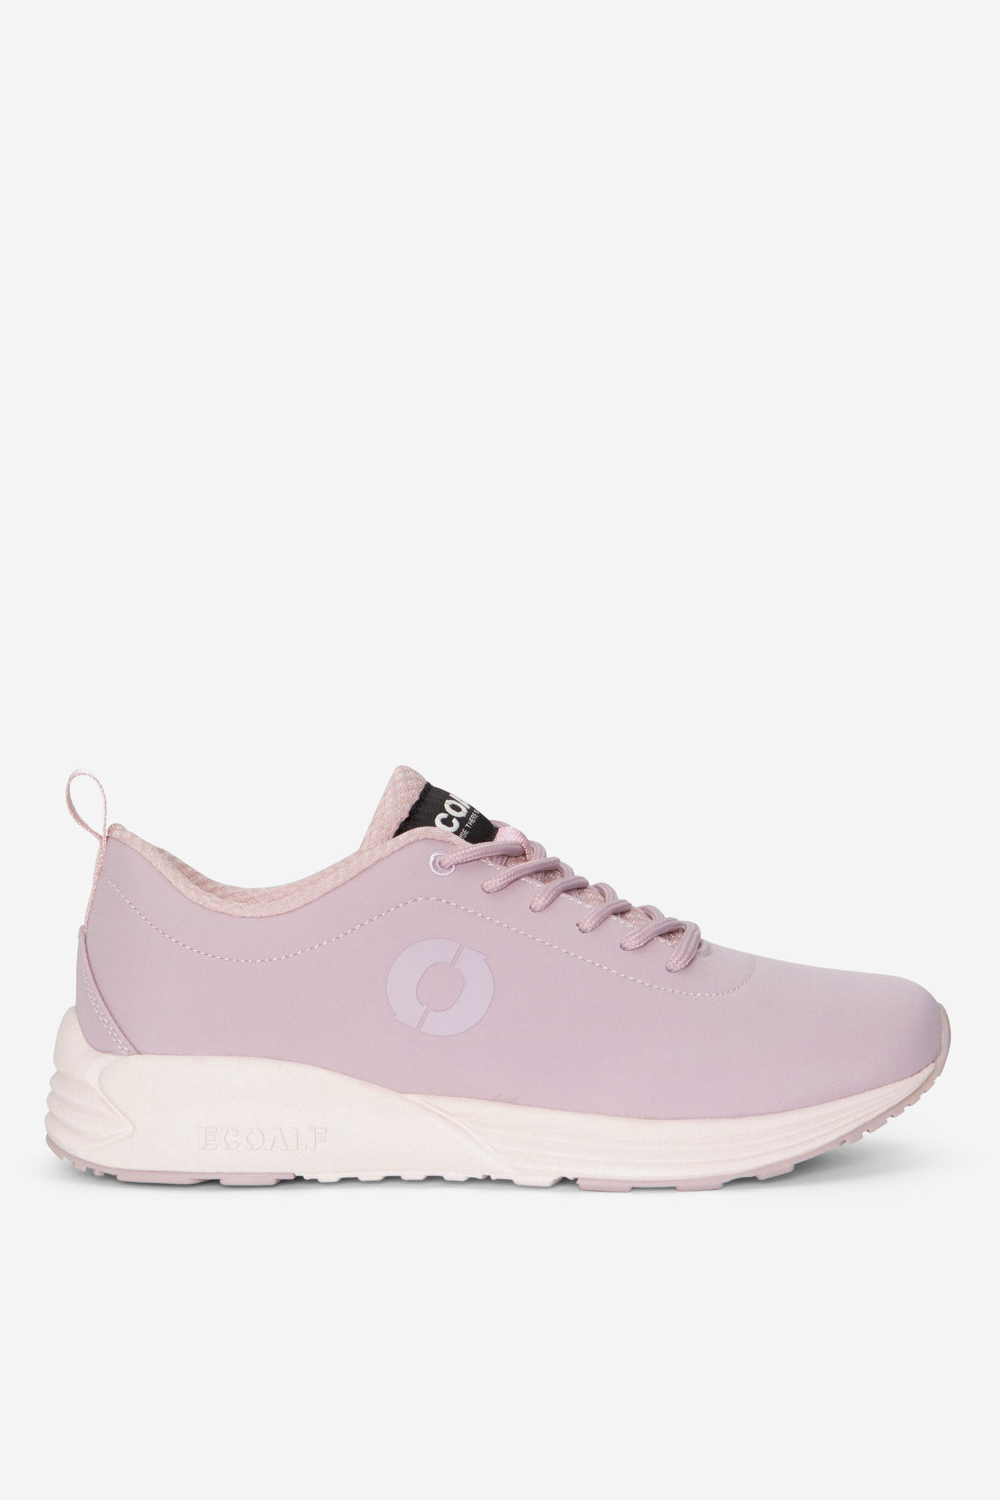 OREGON TRAINERS PINK